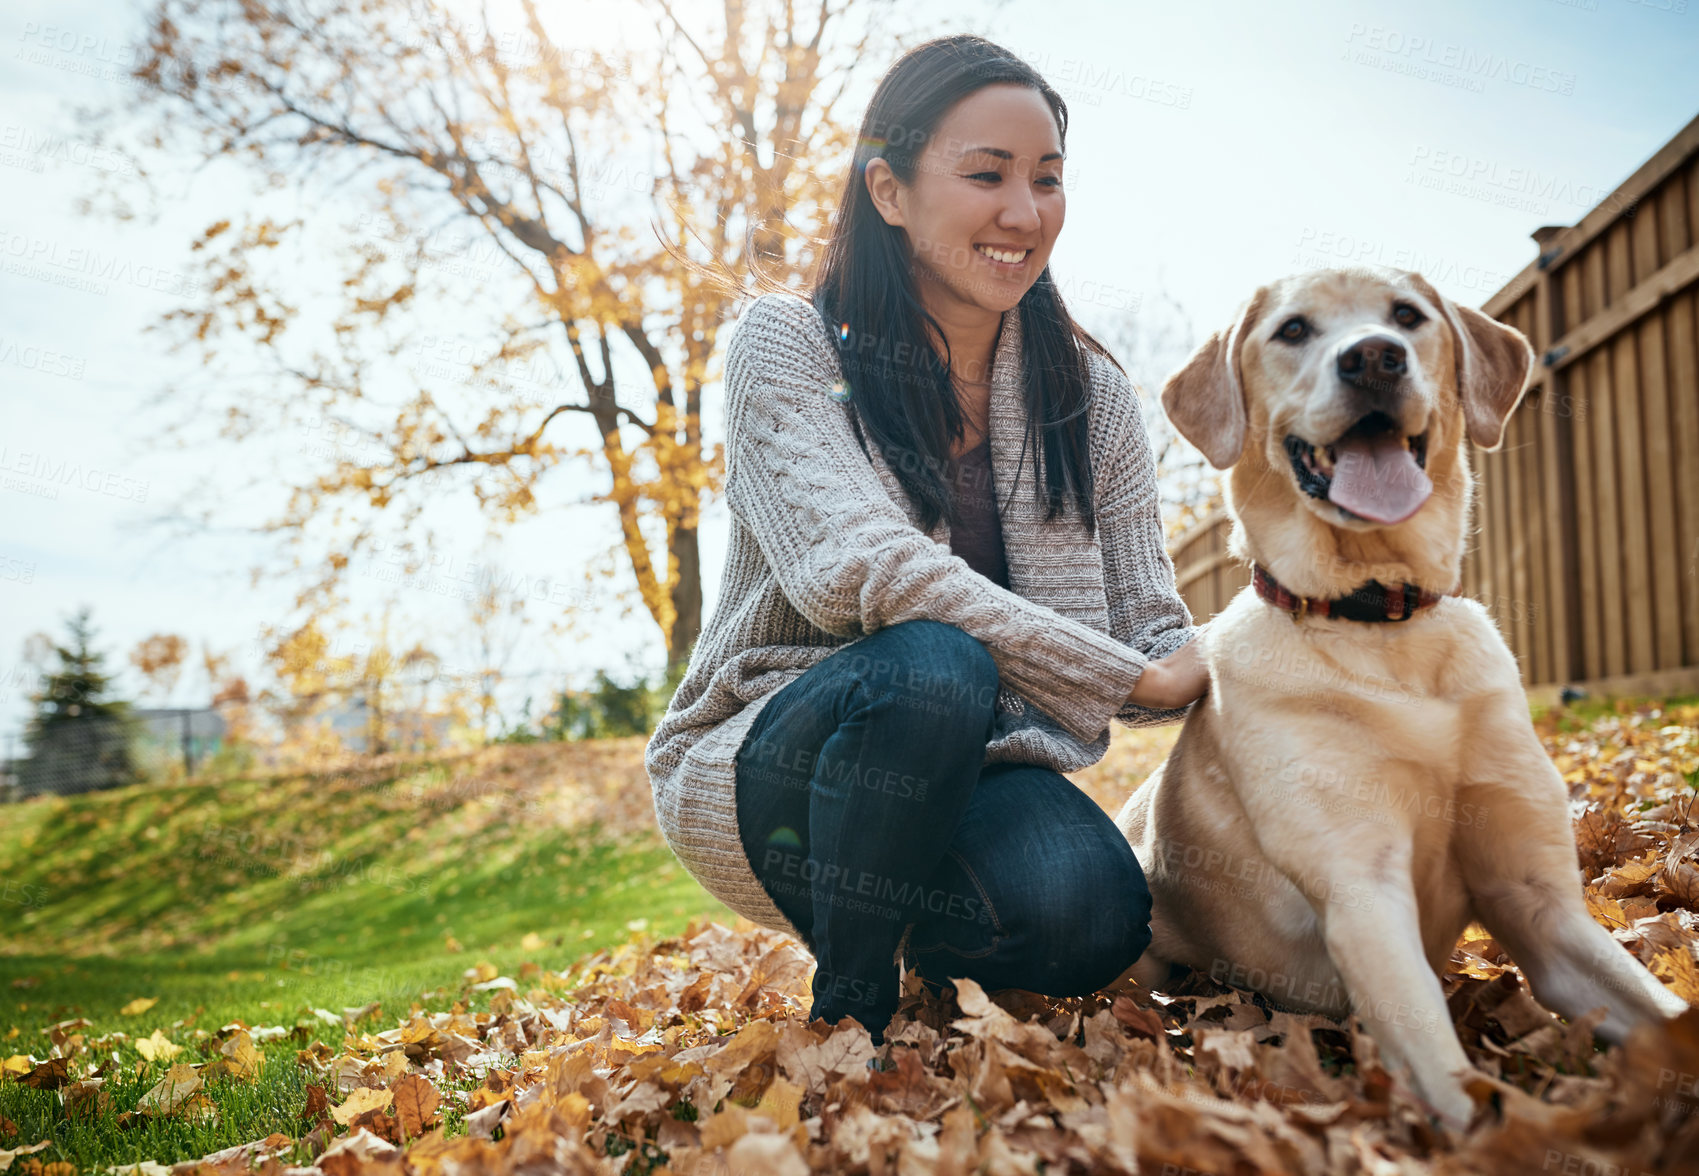 Buy stock photo Shot of an attractive young woman having fun with her dog on an autumn day in a garden